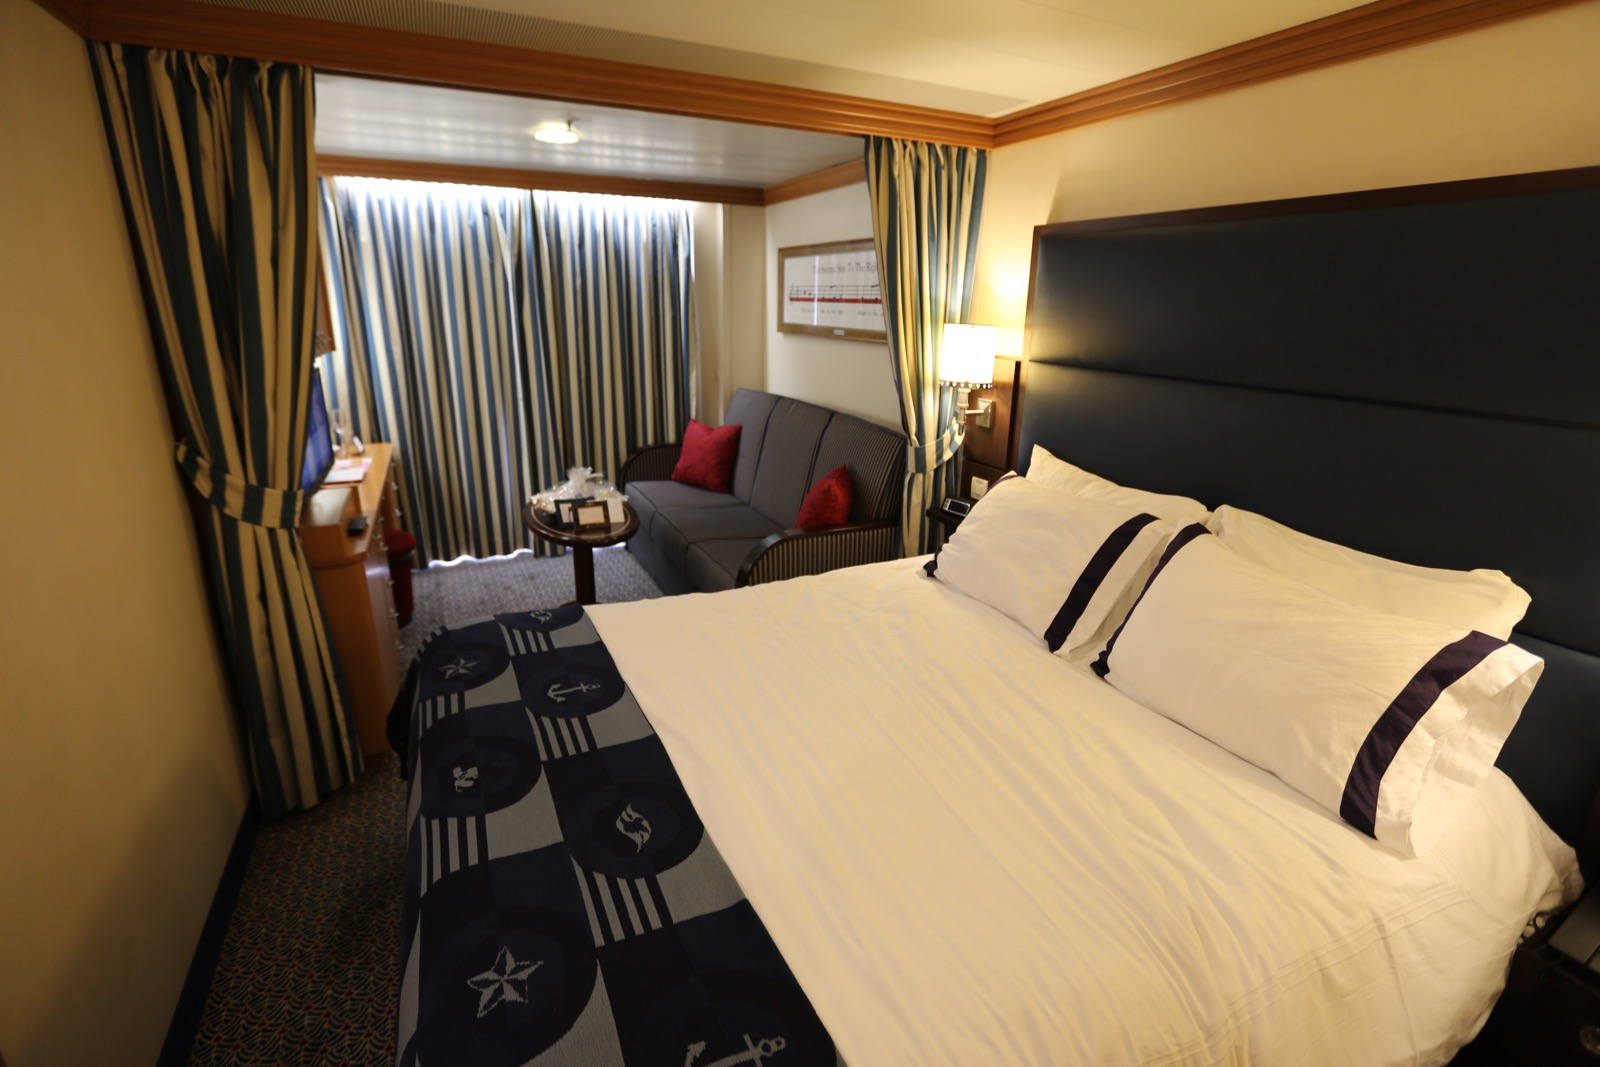 Disney Cruise Line Reviews Of Staterooms Disney Cruise Reviews